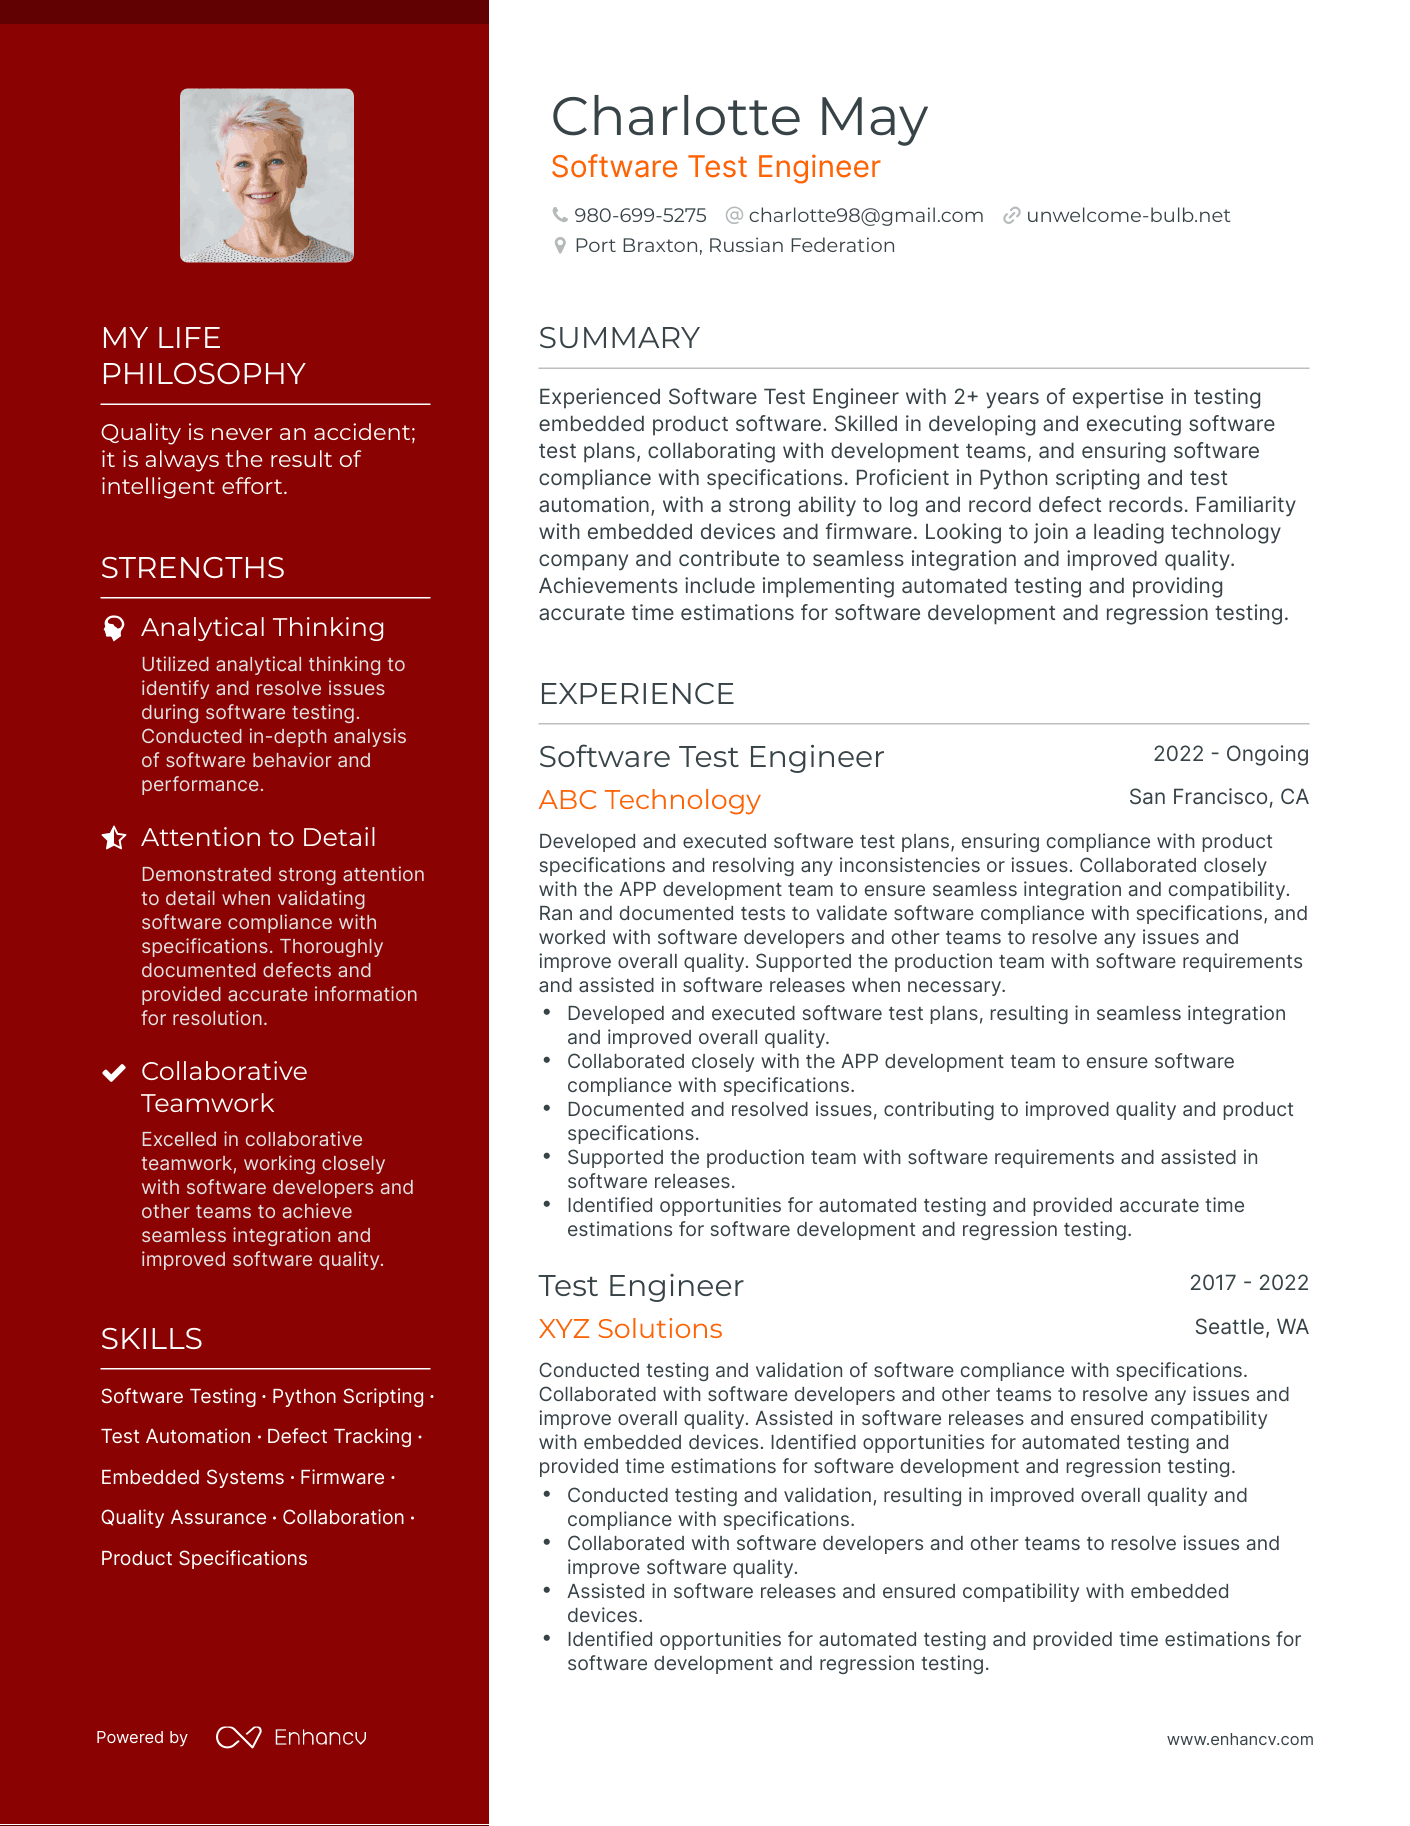 Software Test Engineer resume example